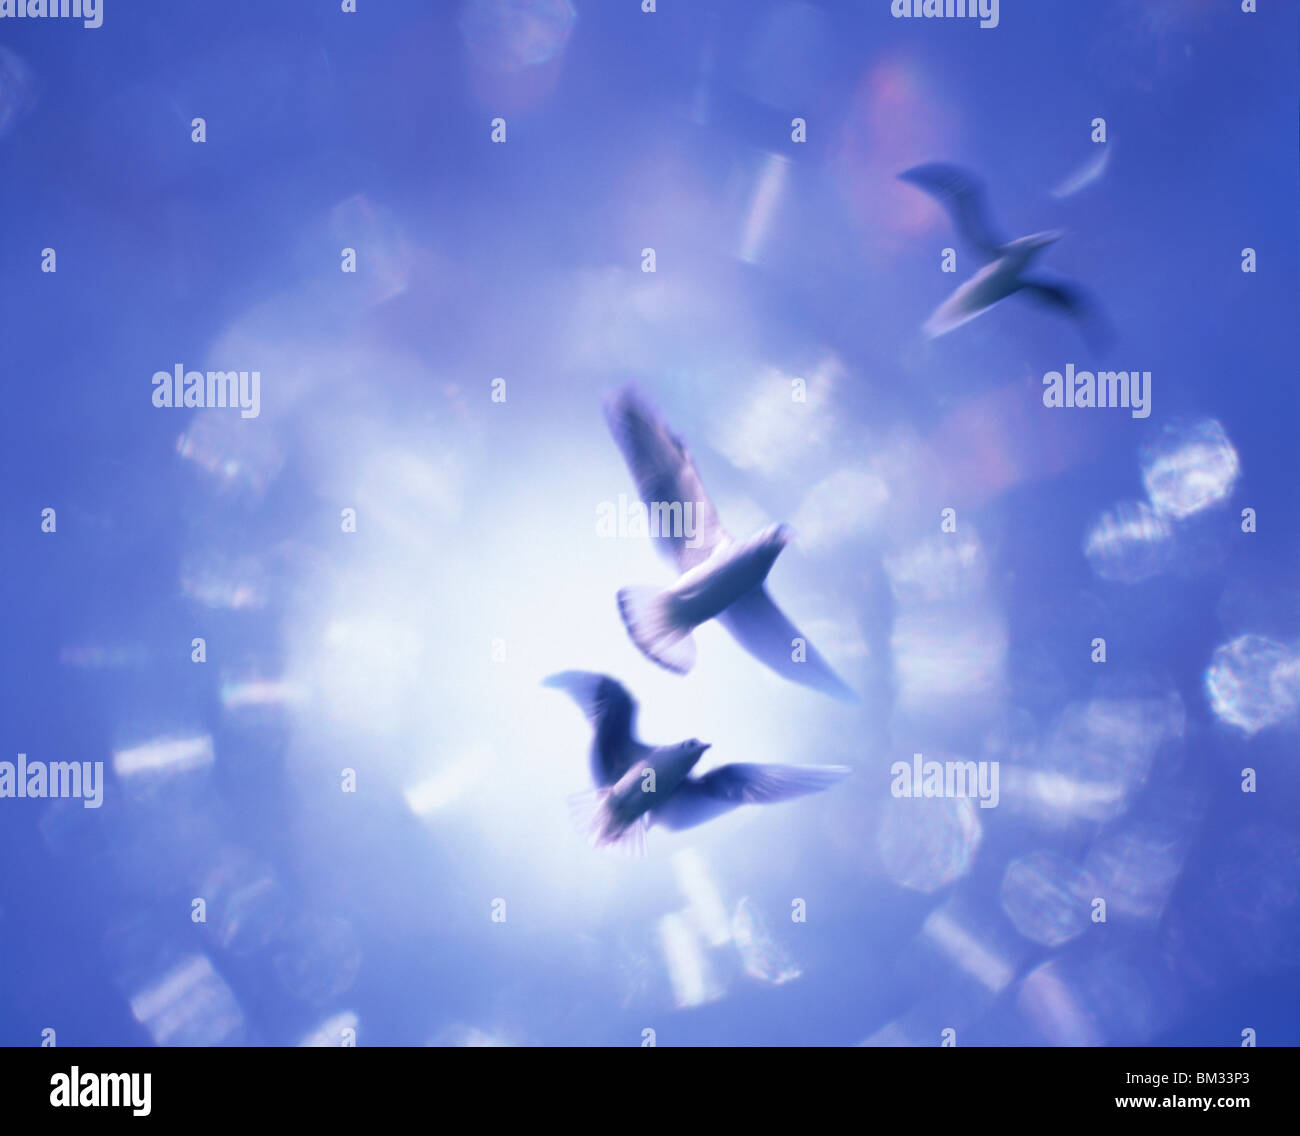 Three birds flying in the air, blue background, computer graphic, blurred motion Stock Photo